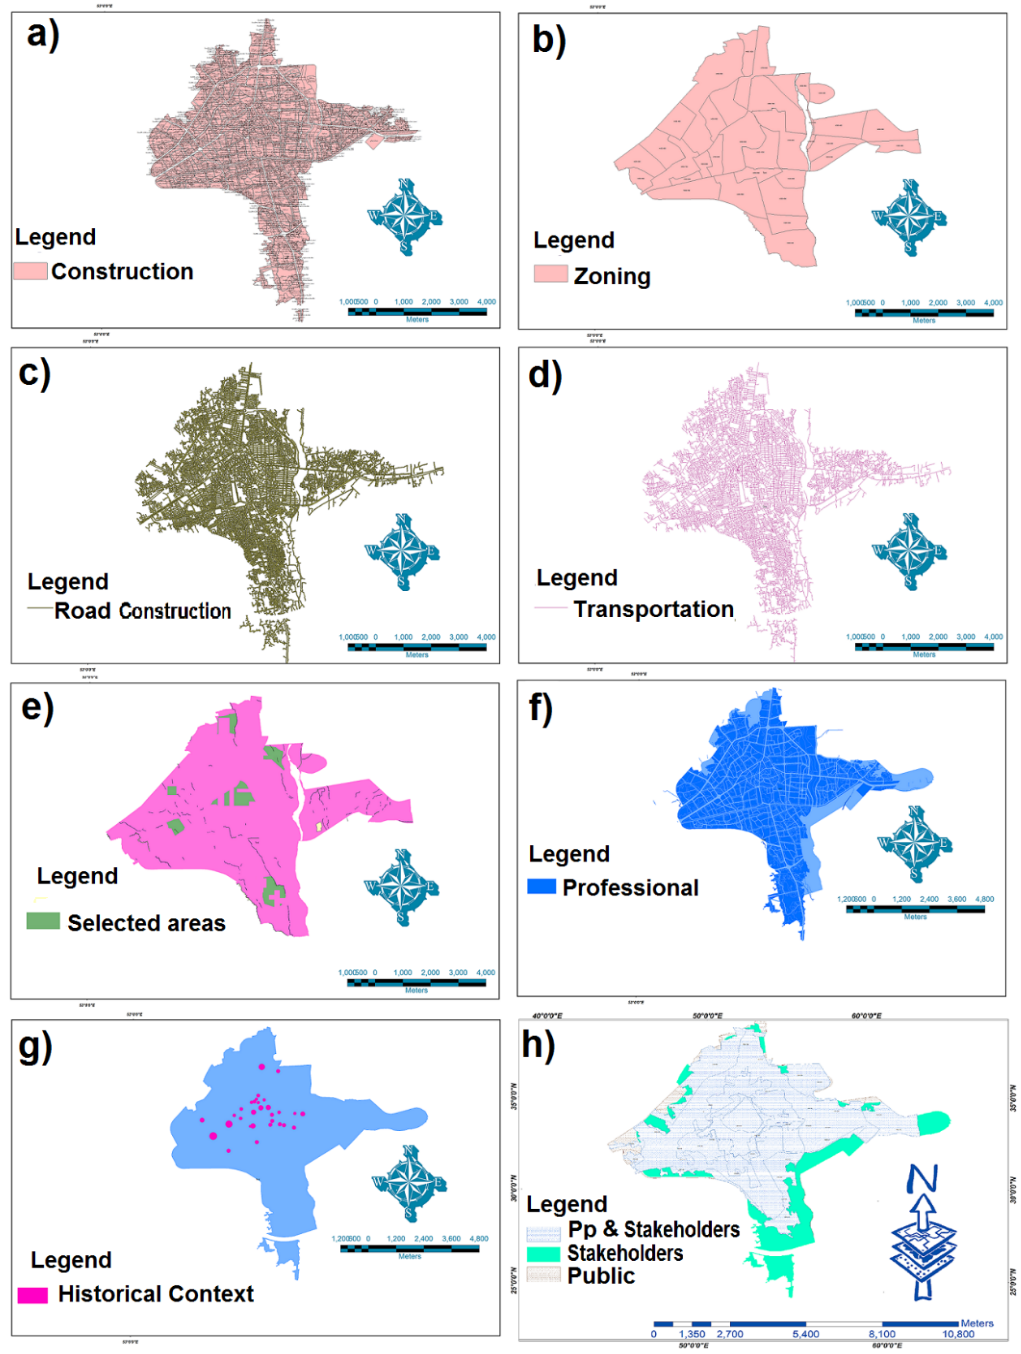 National participation. Collaborative map, a) the
constructions completed up to this point, b) zoning in terms of city locations,
c) asphalted and audited roads, d) transportation status, e) selected places
that seem inappropriate, f) a map that mapping professionals will use, g)
areas identified as historical; h) public participation with stakeholder
participation. 